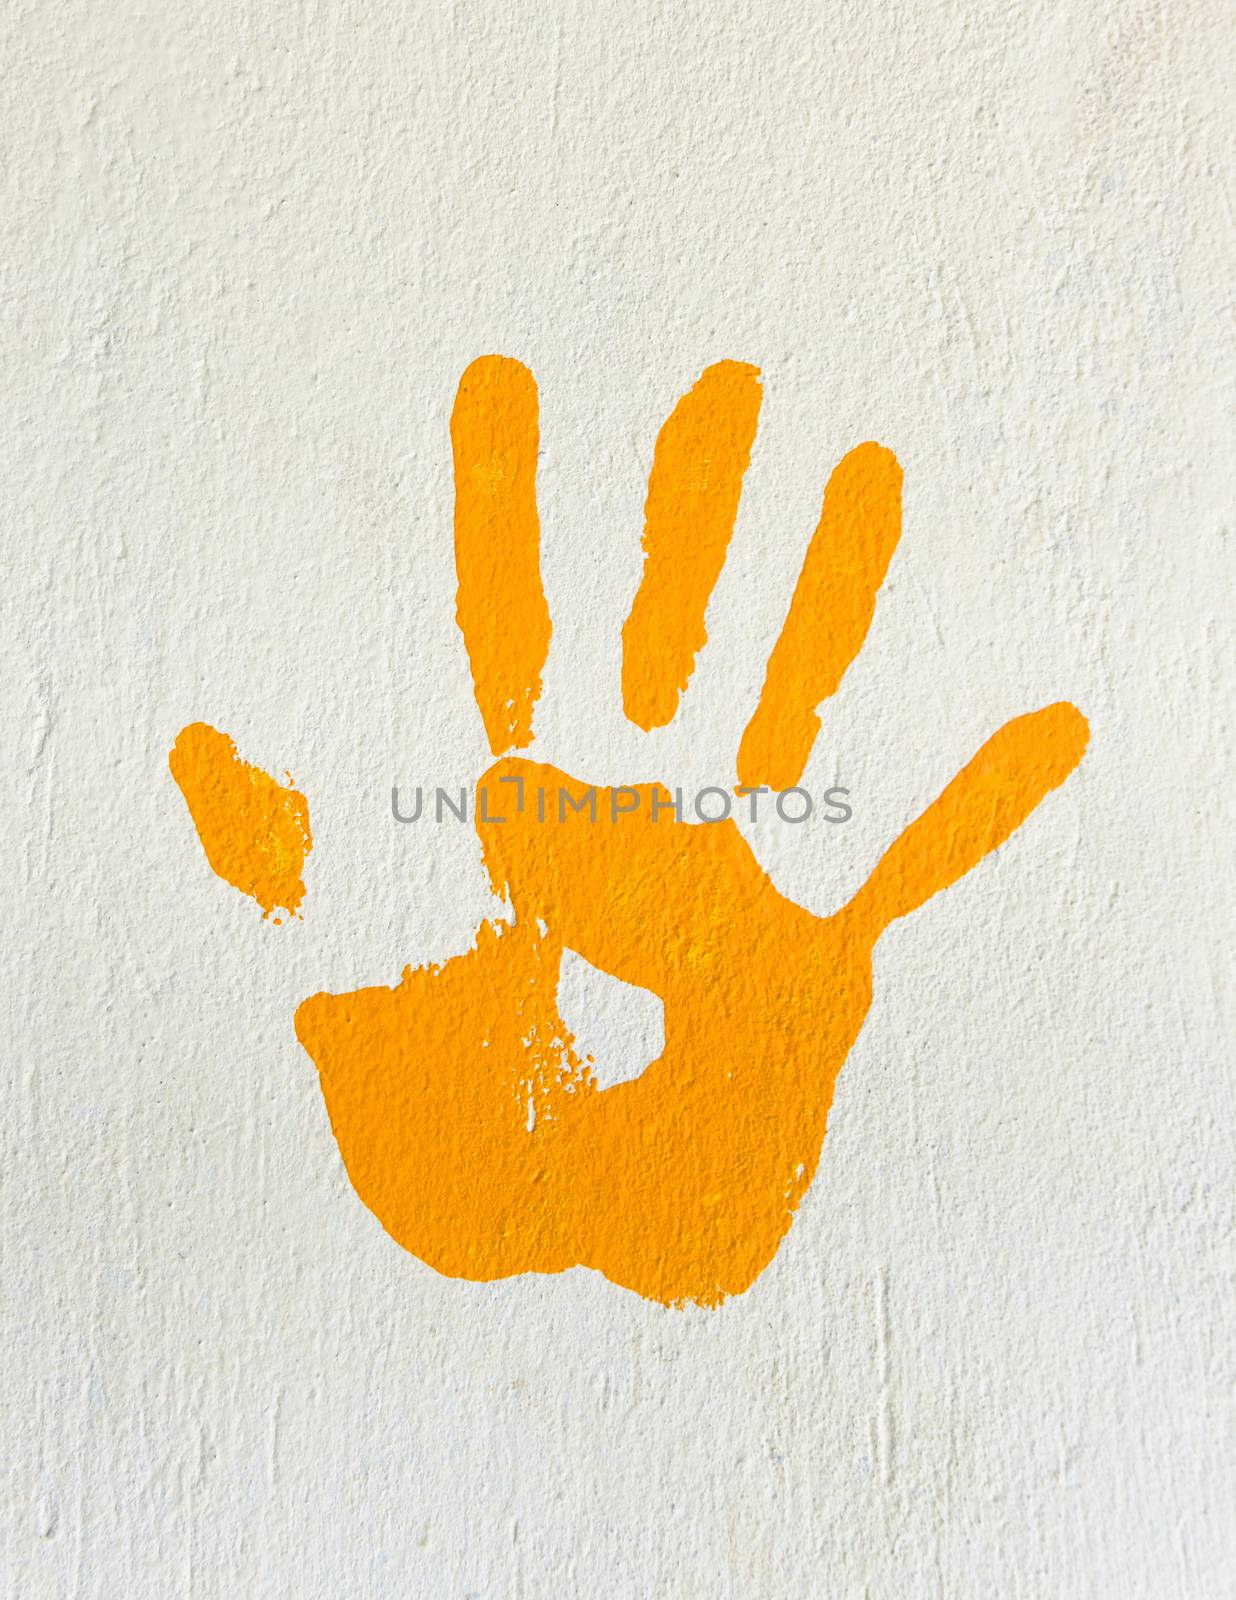 Orange handprint painted on a wall